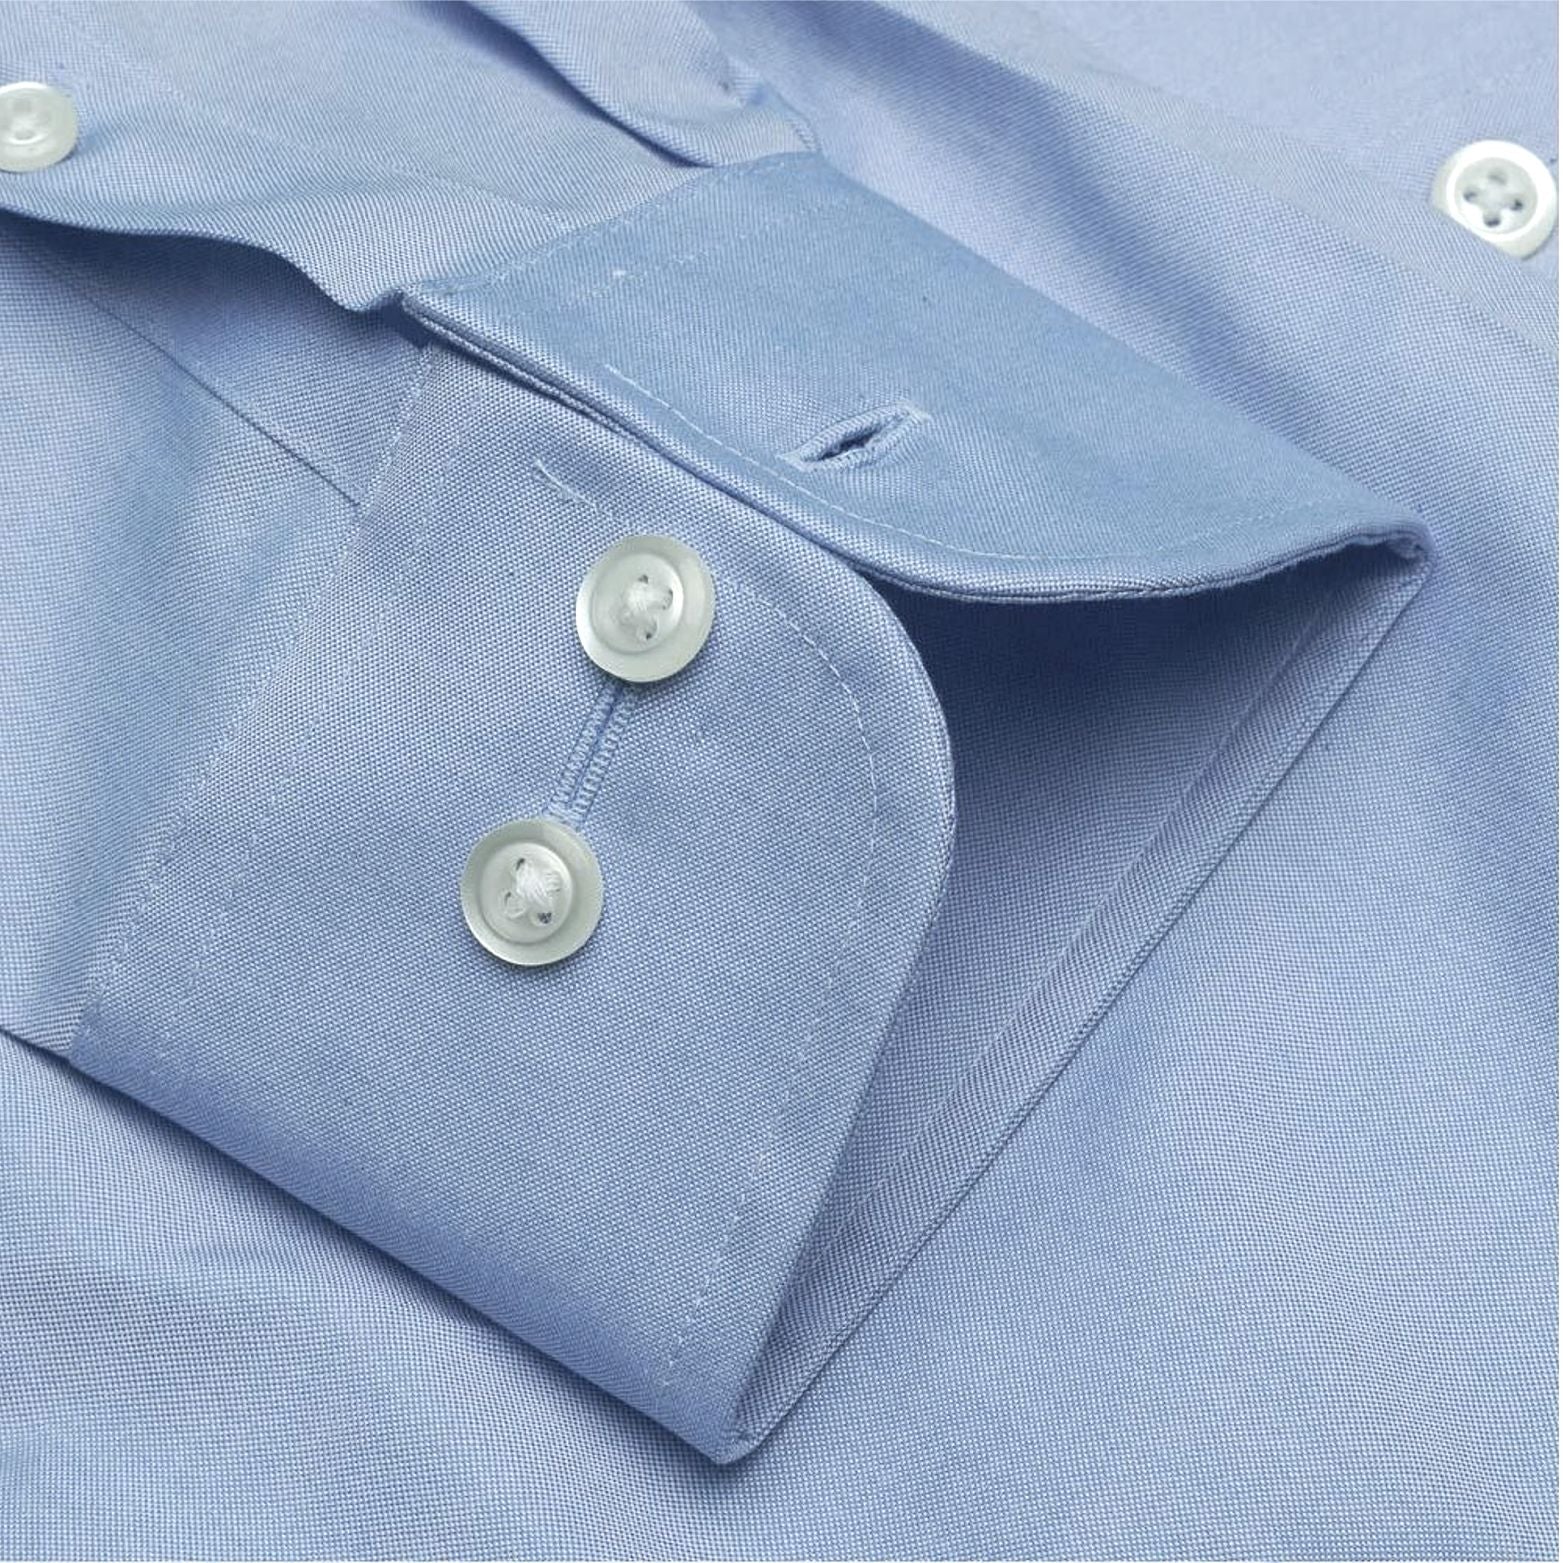 The Classic Blue - Wrinkle-Free Pinpoint Oxford Cotton Dress Shirt by Cooper & Stewart